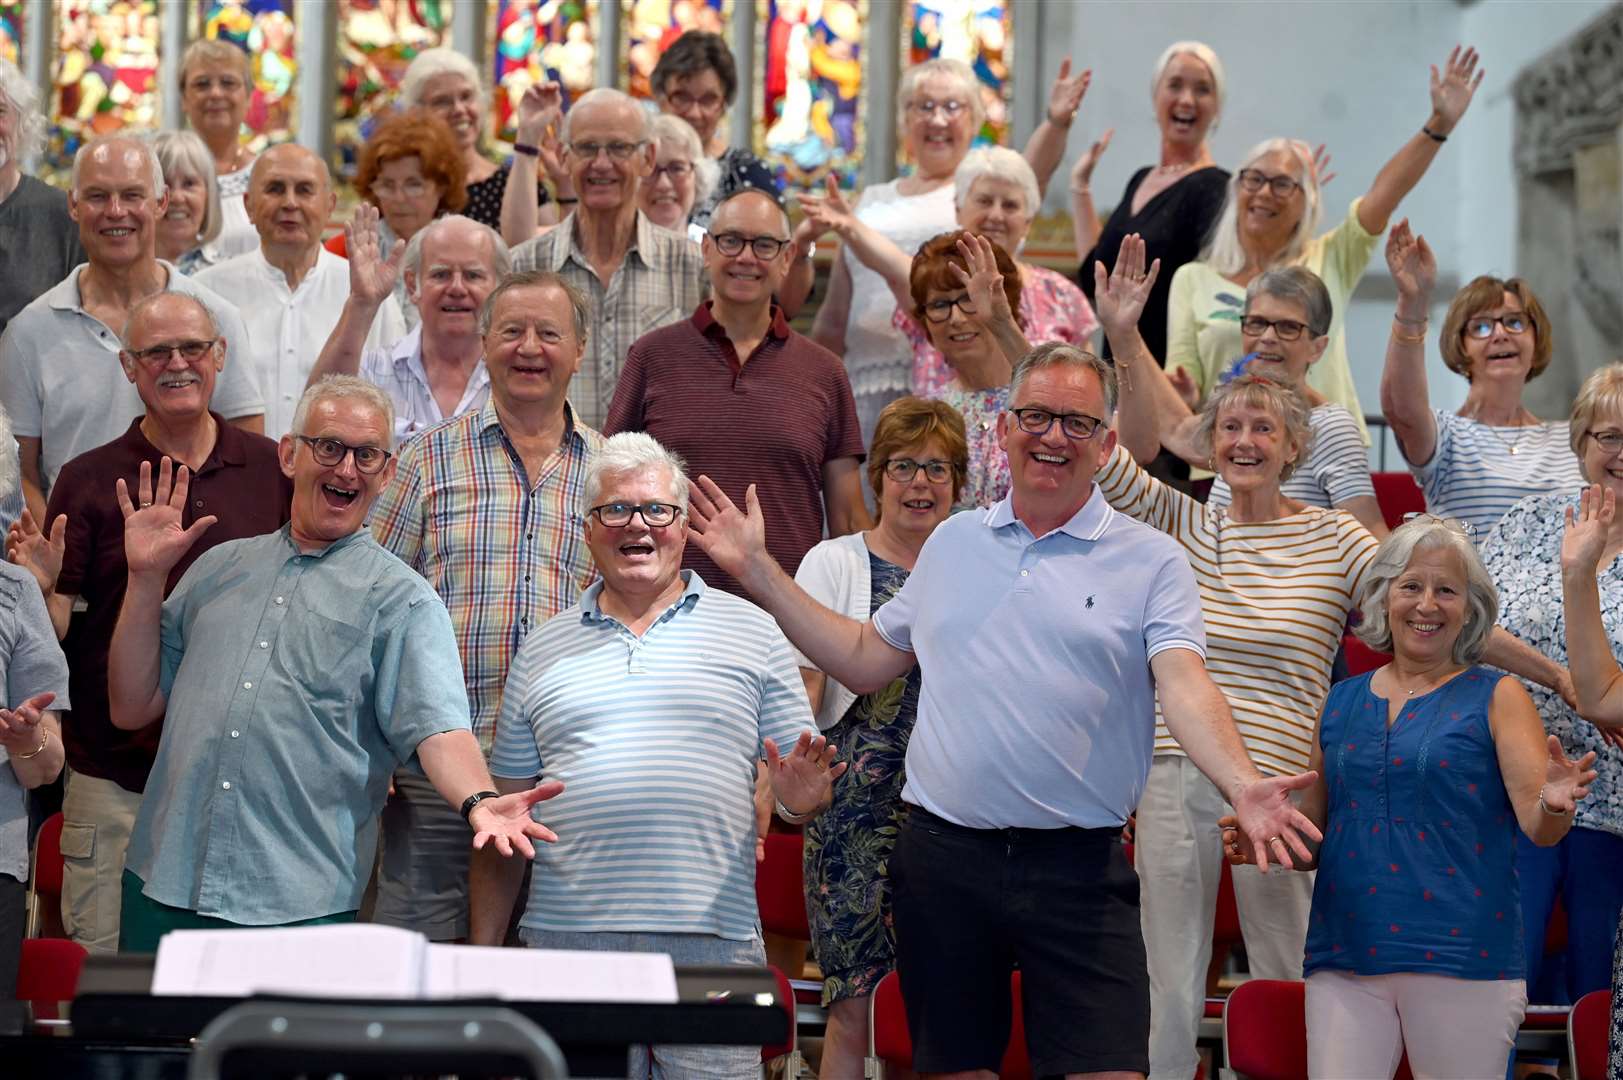 The group’s concert is being held at St Nicholas Chapel in Lynn on Sunday